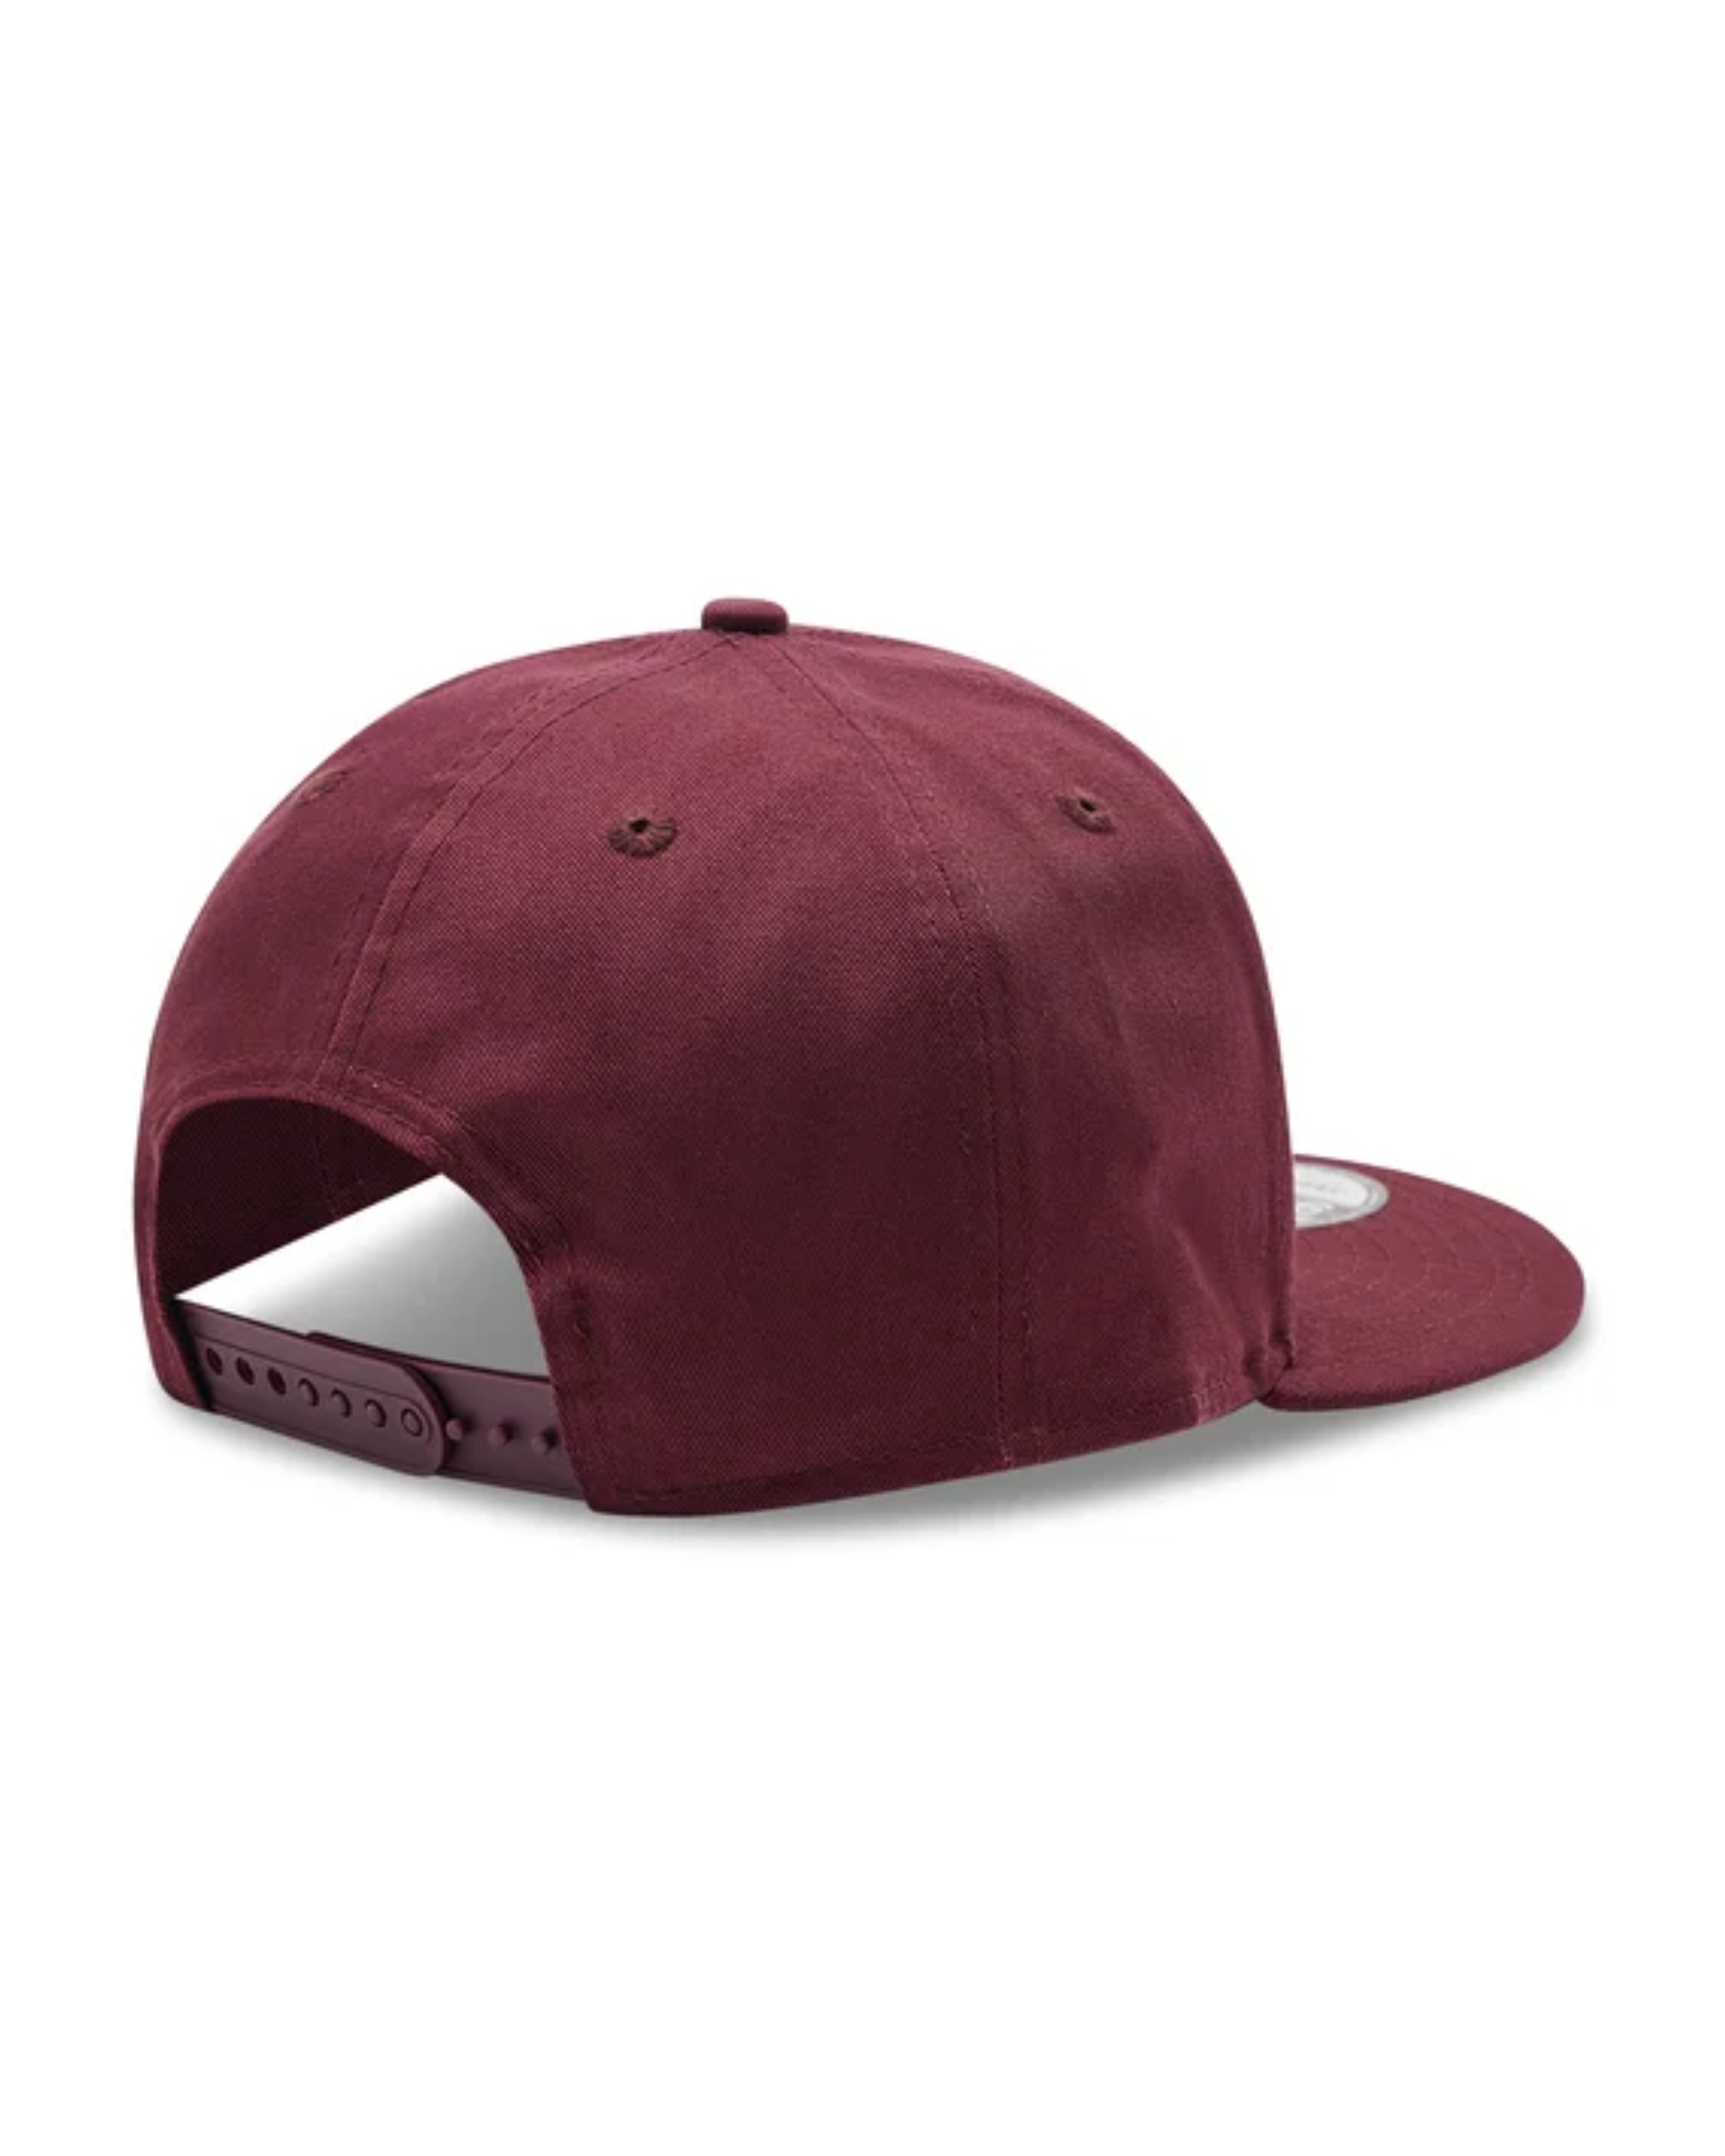 New York Yankees League Essential Wine Red 9FIFTY Snapback Cap